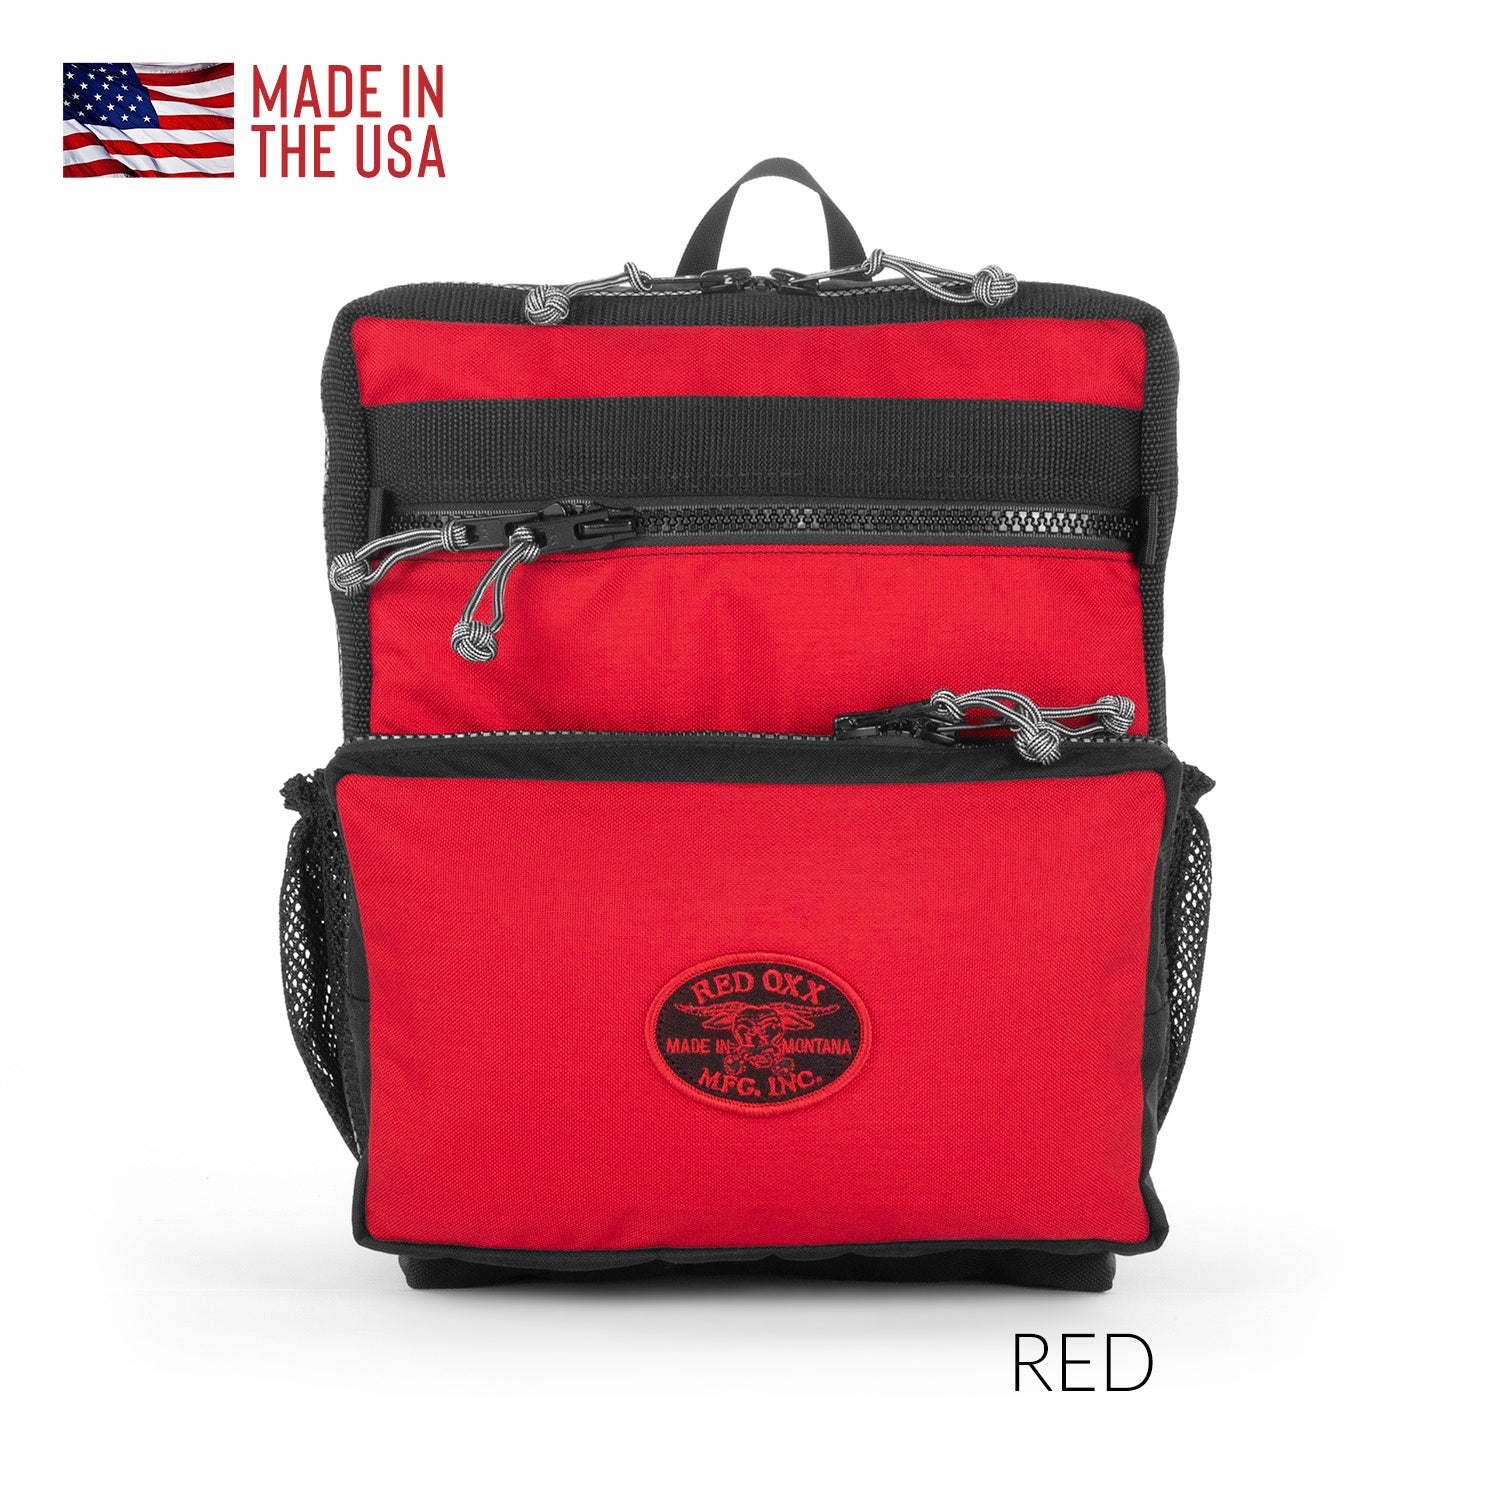 Red Oxx Packing Cube Set